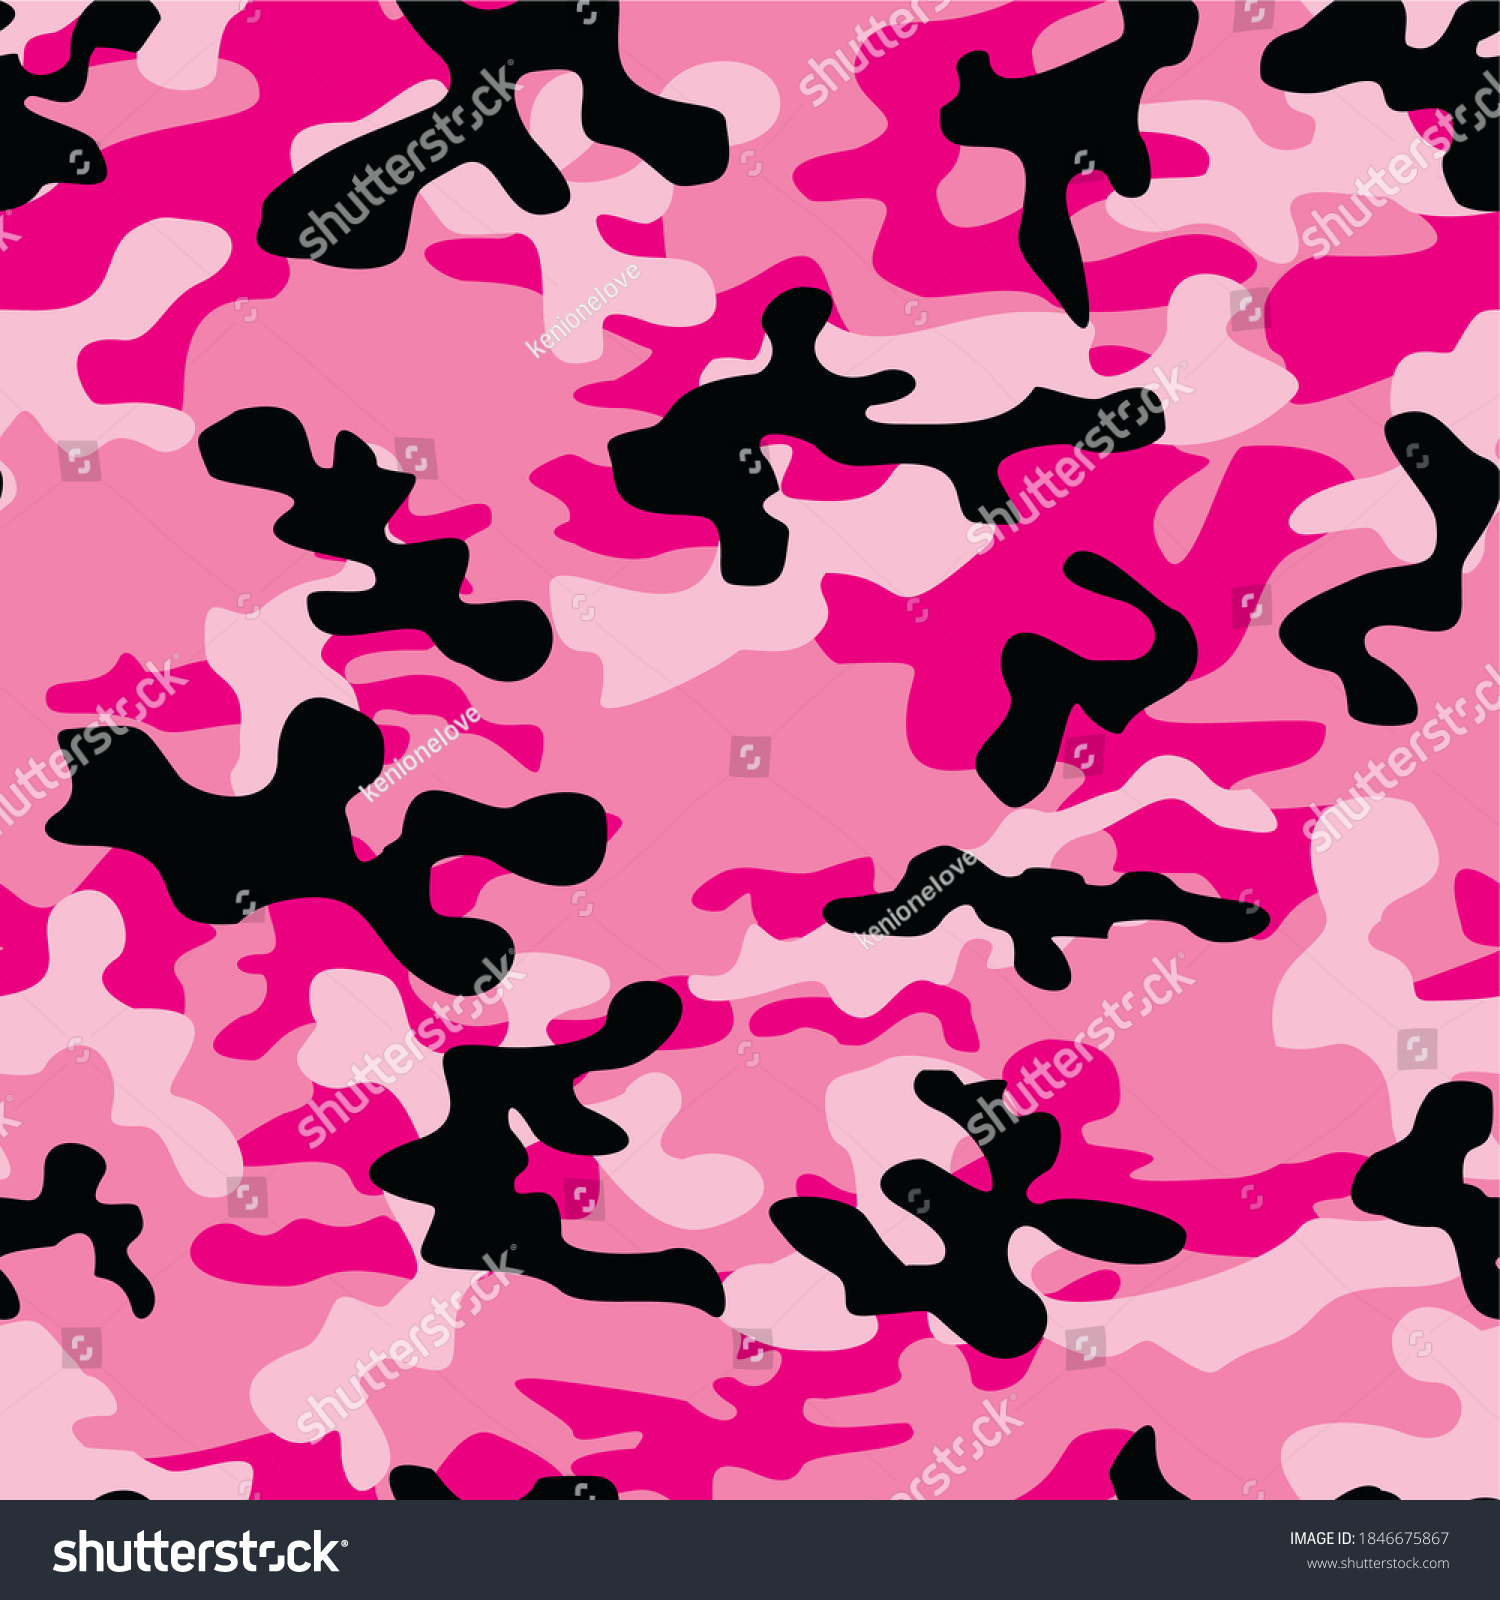 Pink Camouflage Seamless Vector Print Stock Vector (Royalty Free ...